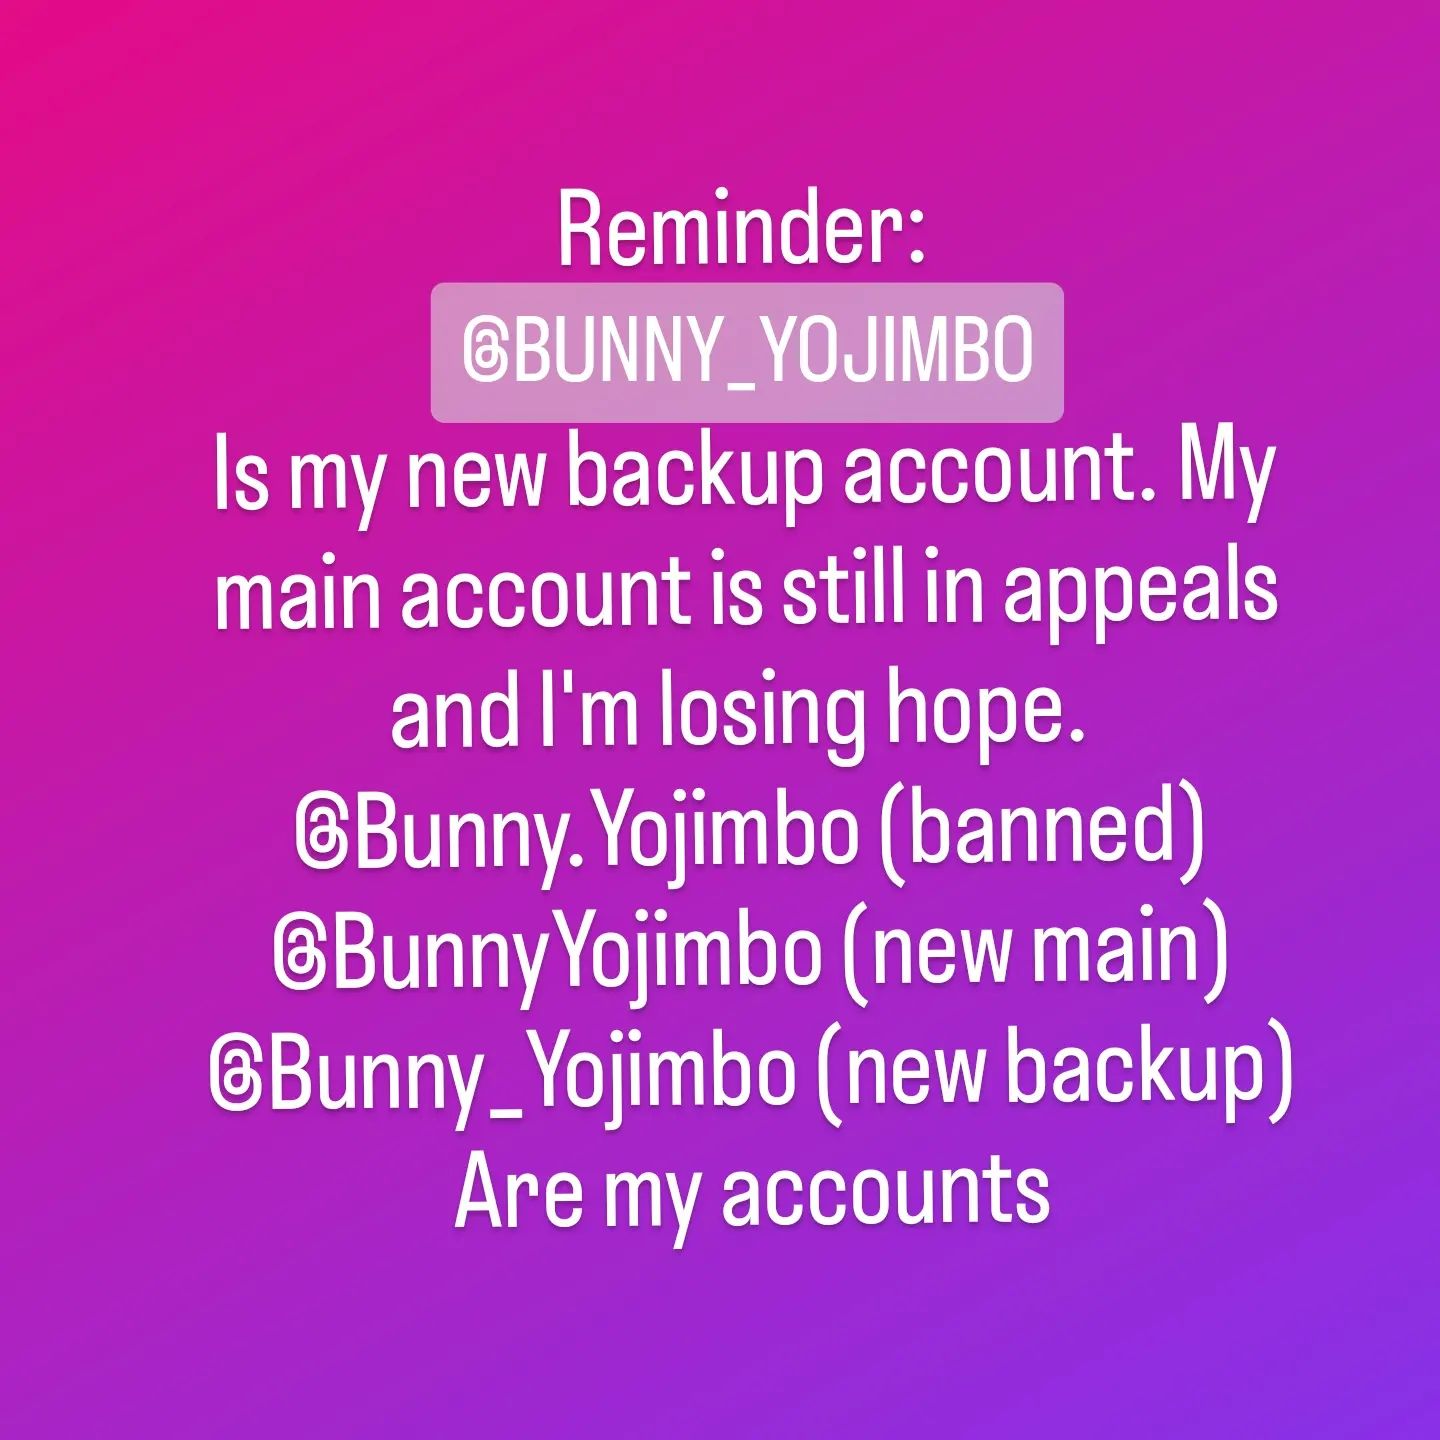 I've gotten a couple requests if that account is actually me- and yes it is. I can only follow so many people a day, so I'm slowly trying to follow everyone I follow here. I lost over 13k followers when my main got pulled, so if you see this and like my content, go ahead and give @bunny_yojimbo a follow just in case this account ends up like my main and feel free to share a post on this account asking people to check me out so I can try to find those I lost and new folks who might like my content. And if you got any magic you can do to get my main about out of appeals and reinstated I'd appreciate it!